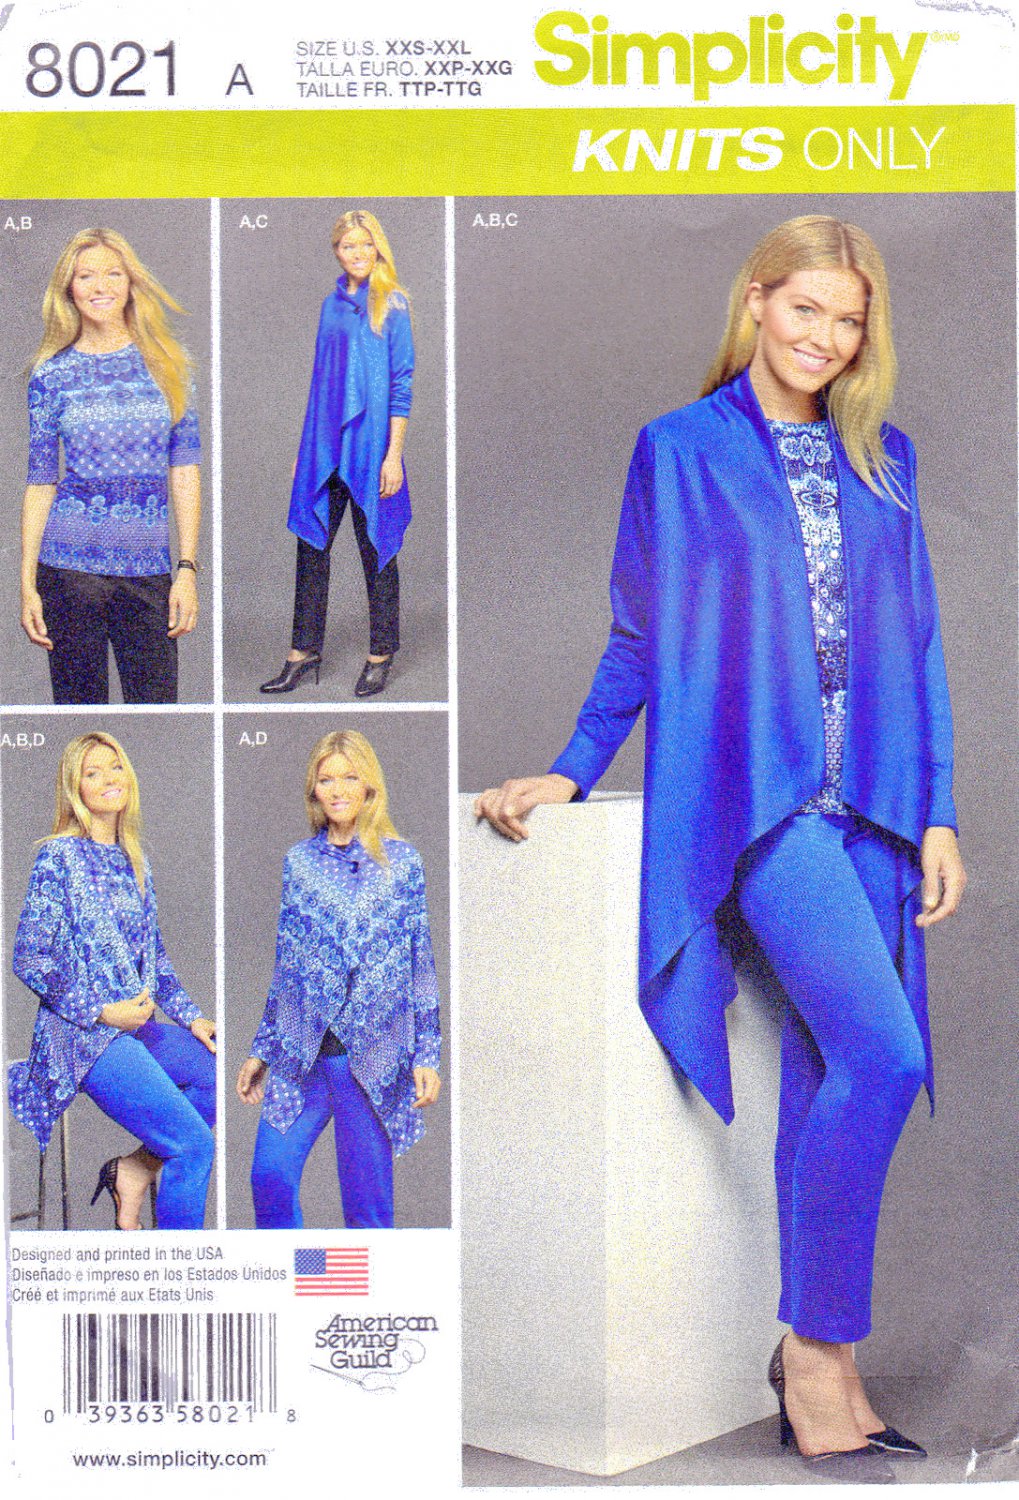 Simplicity 8021 Misses Womens Sewing Pattern Knit Tops Pants Cardigan 2 Lengths Sizes XXS-XXL